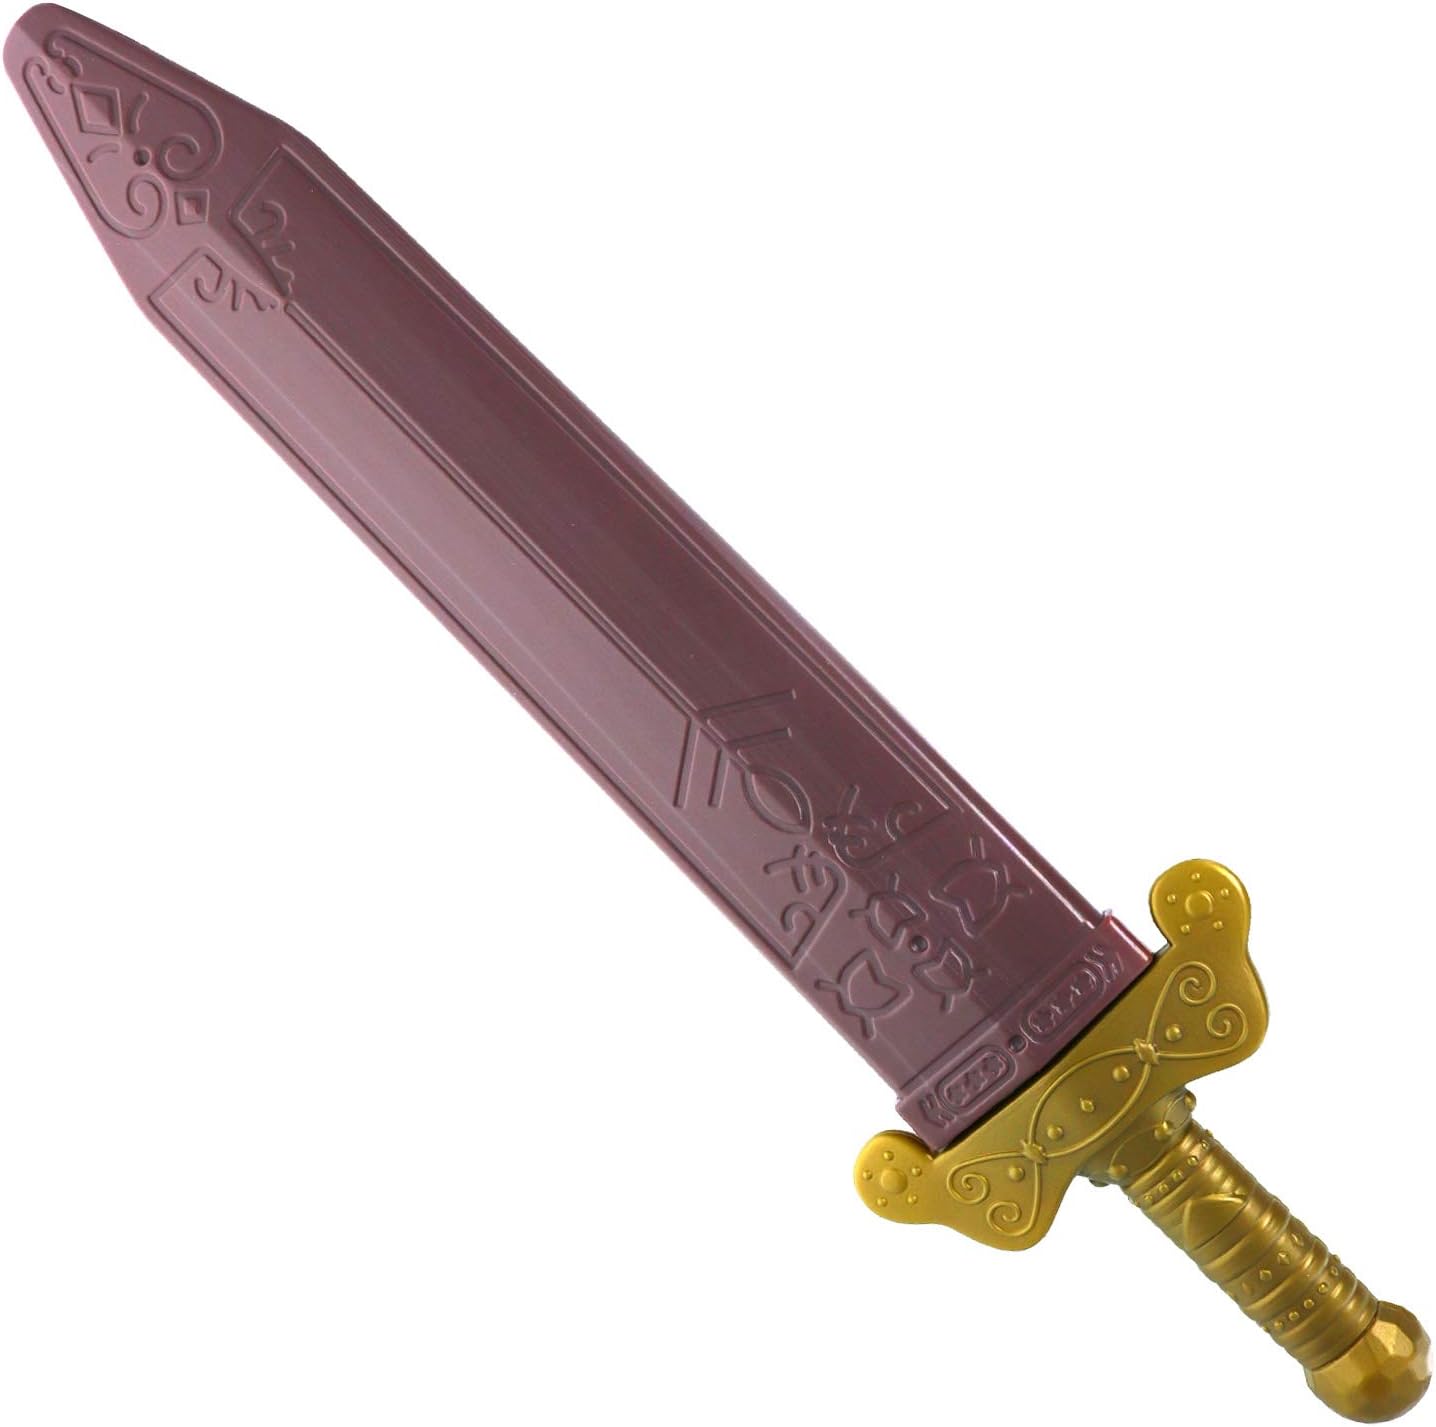 GIFTEXPRESS 19" Plastic Toy Roman Sword with Sheath for Pretend Play